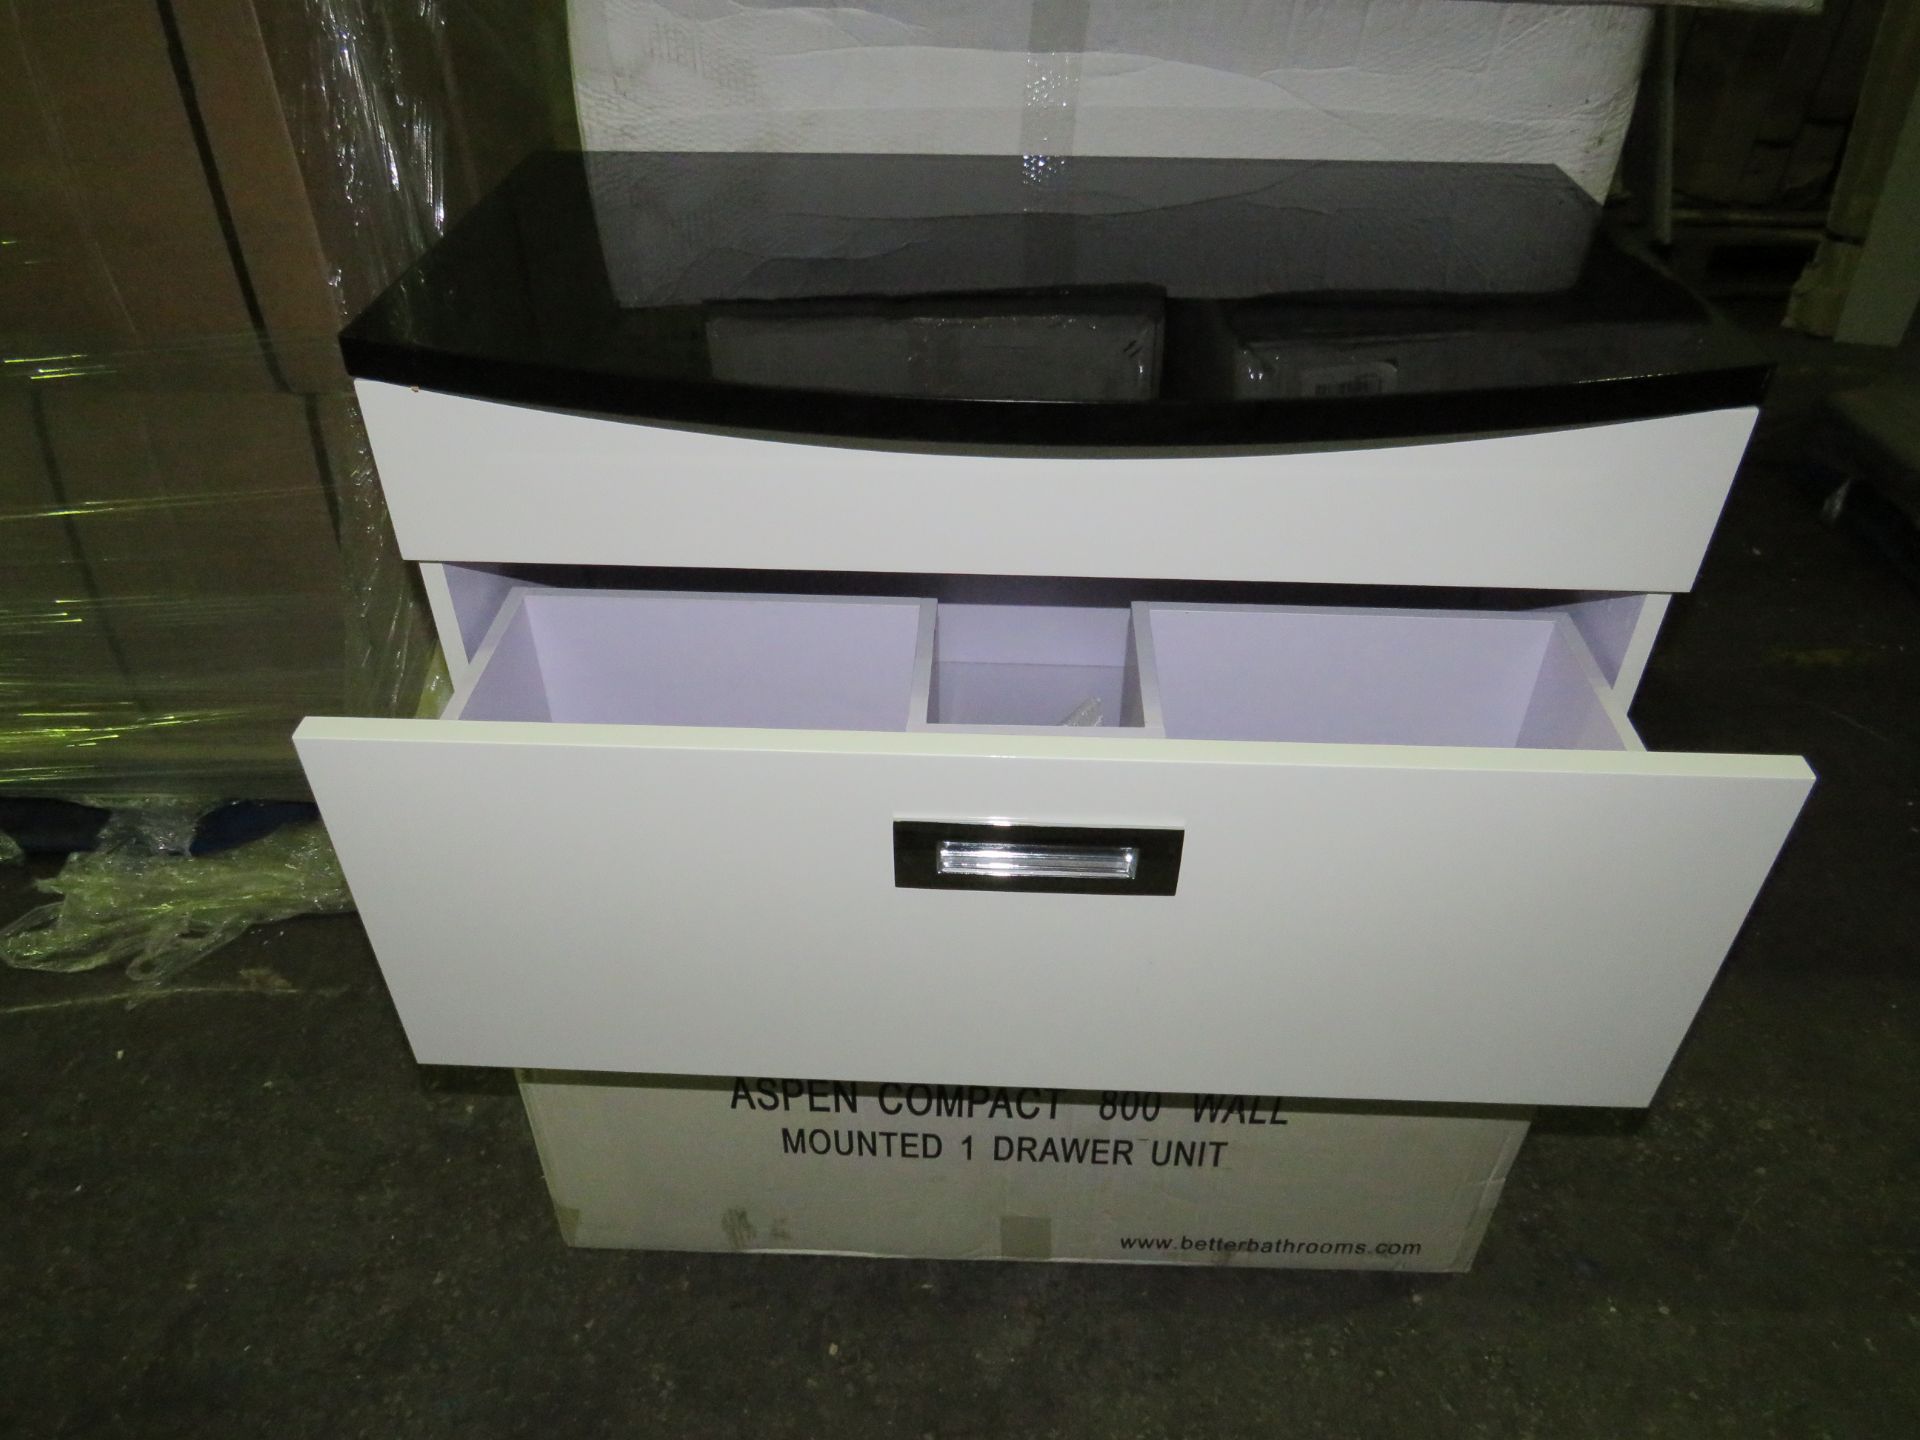 Aspen Compact 800mm Wall-Mounted 1-Drawer Gloss White Vanity Unit - Good Condition & Boxed. - Paired